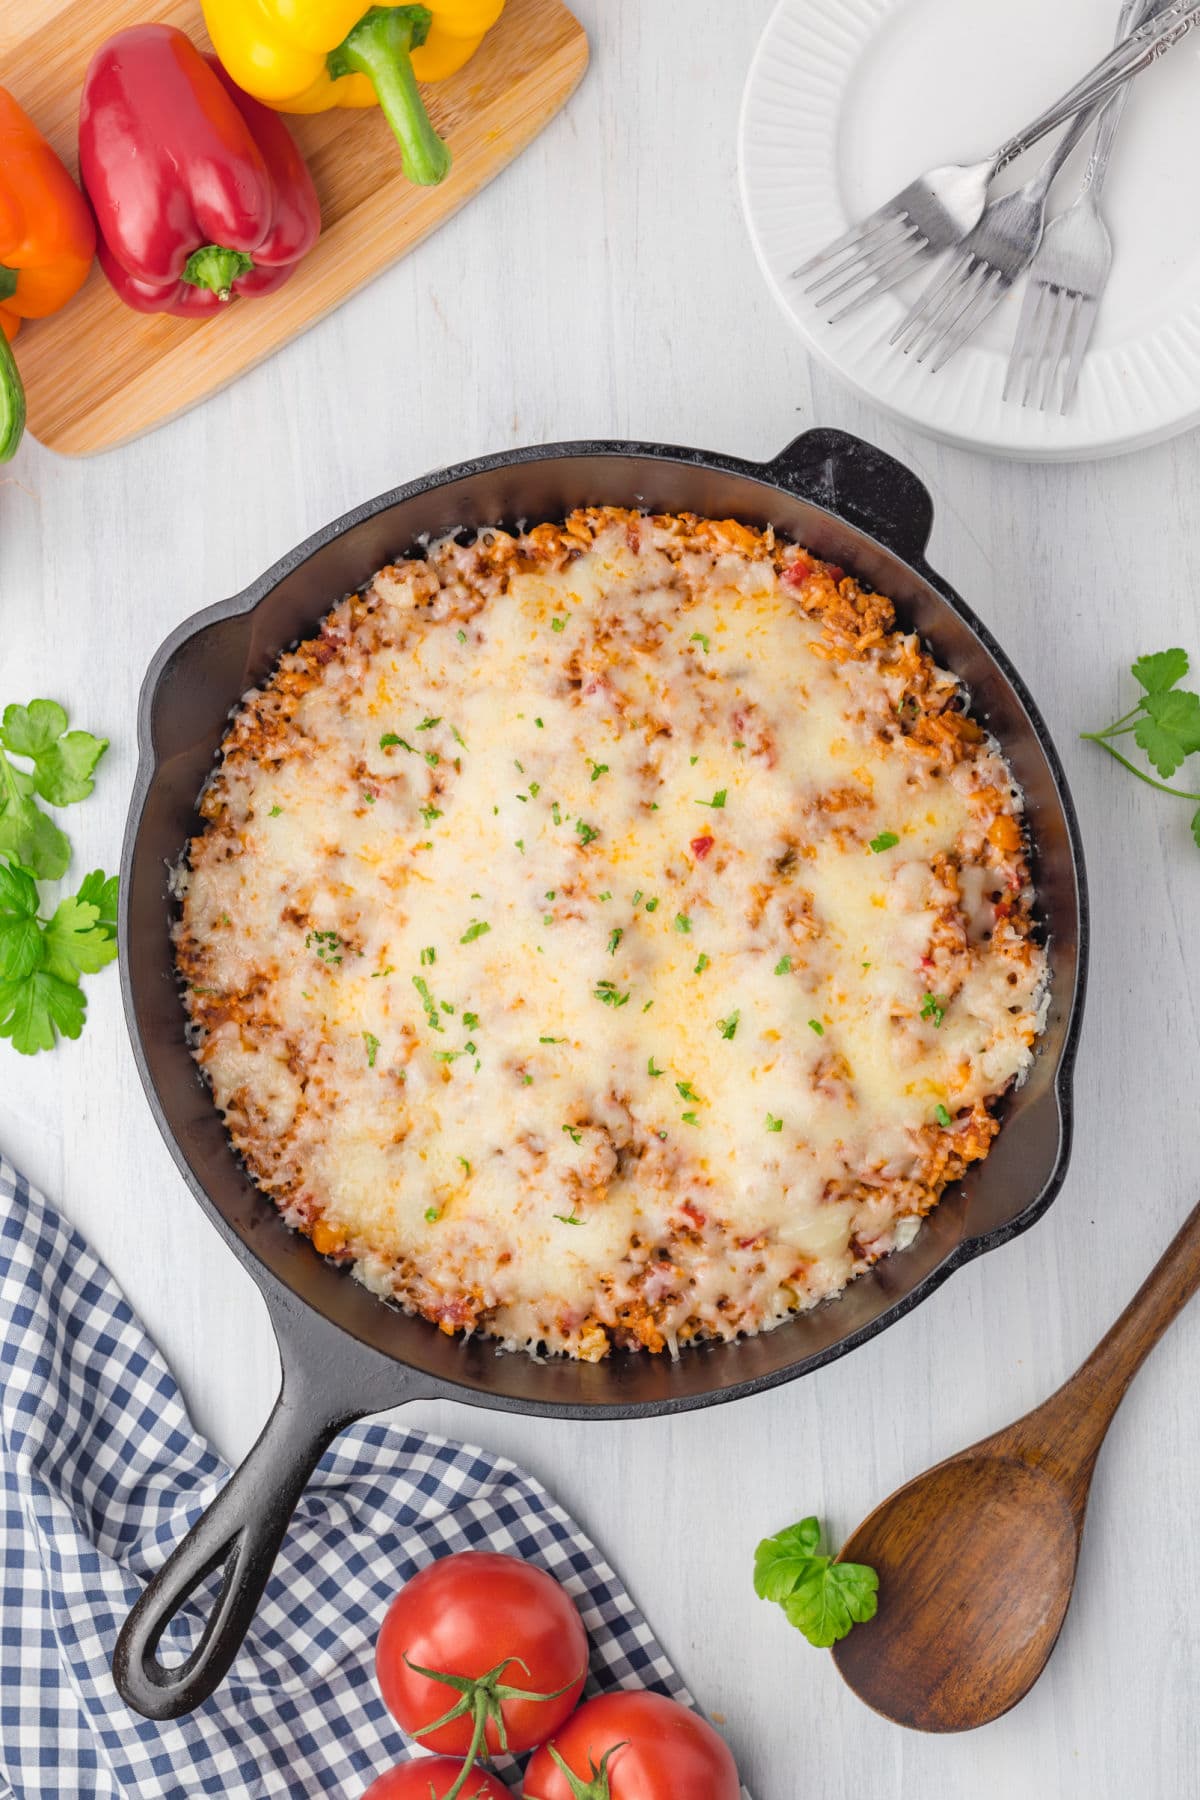 Delicious ground beef and rice casserole in an iron skillet